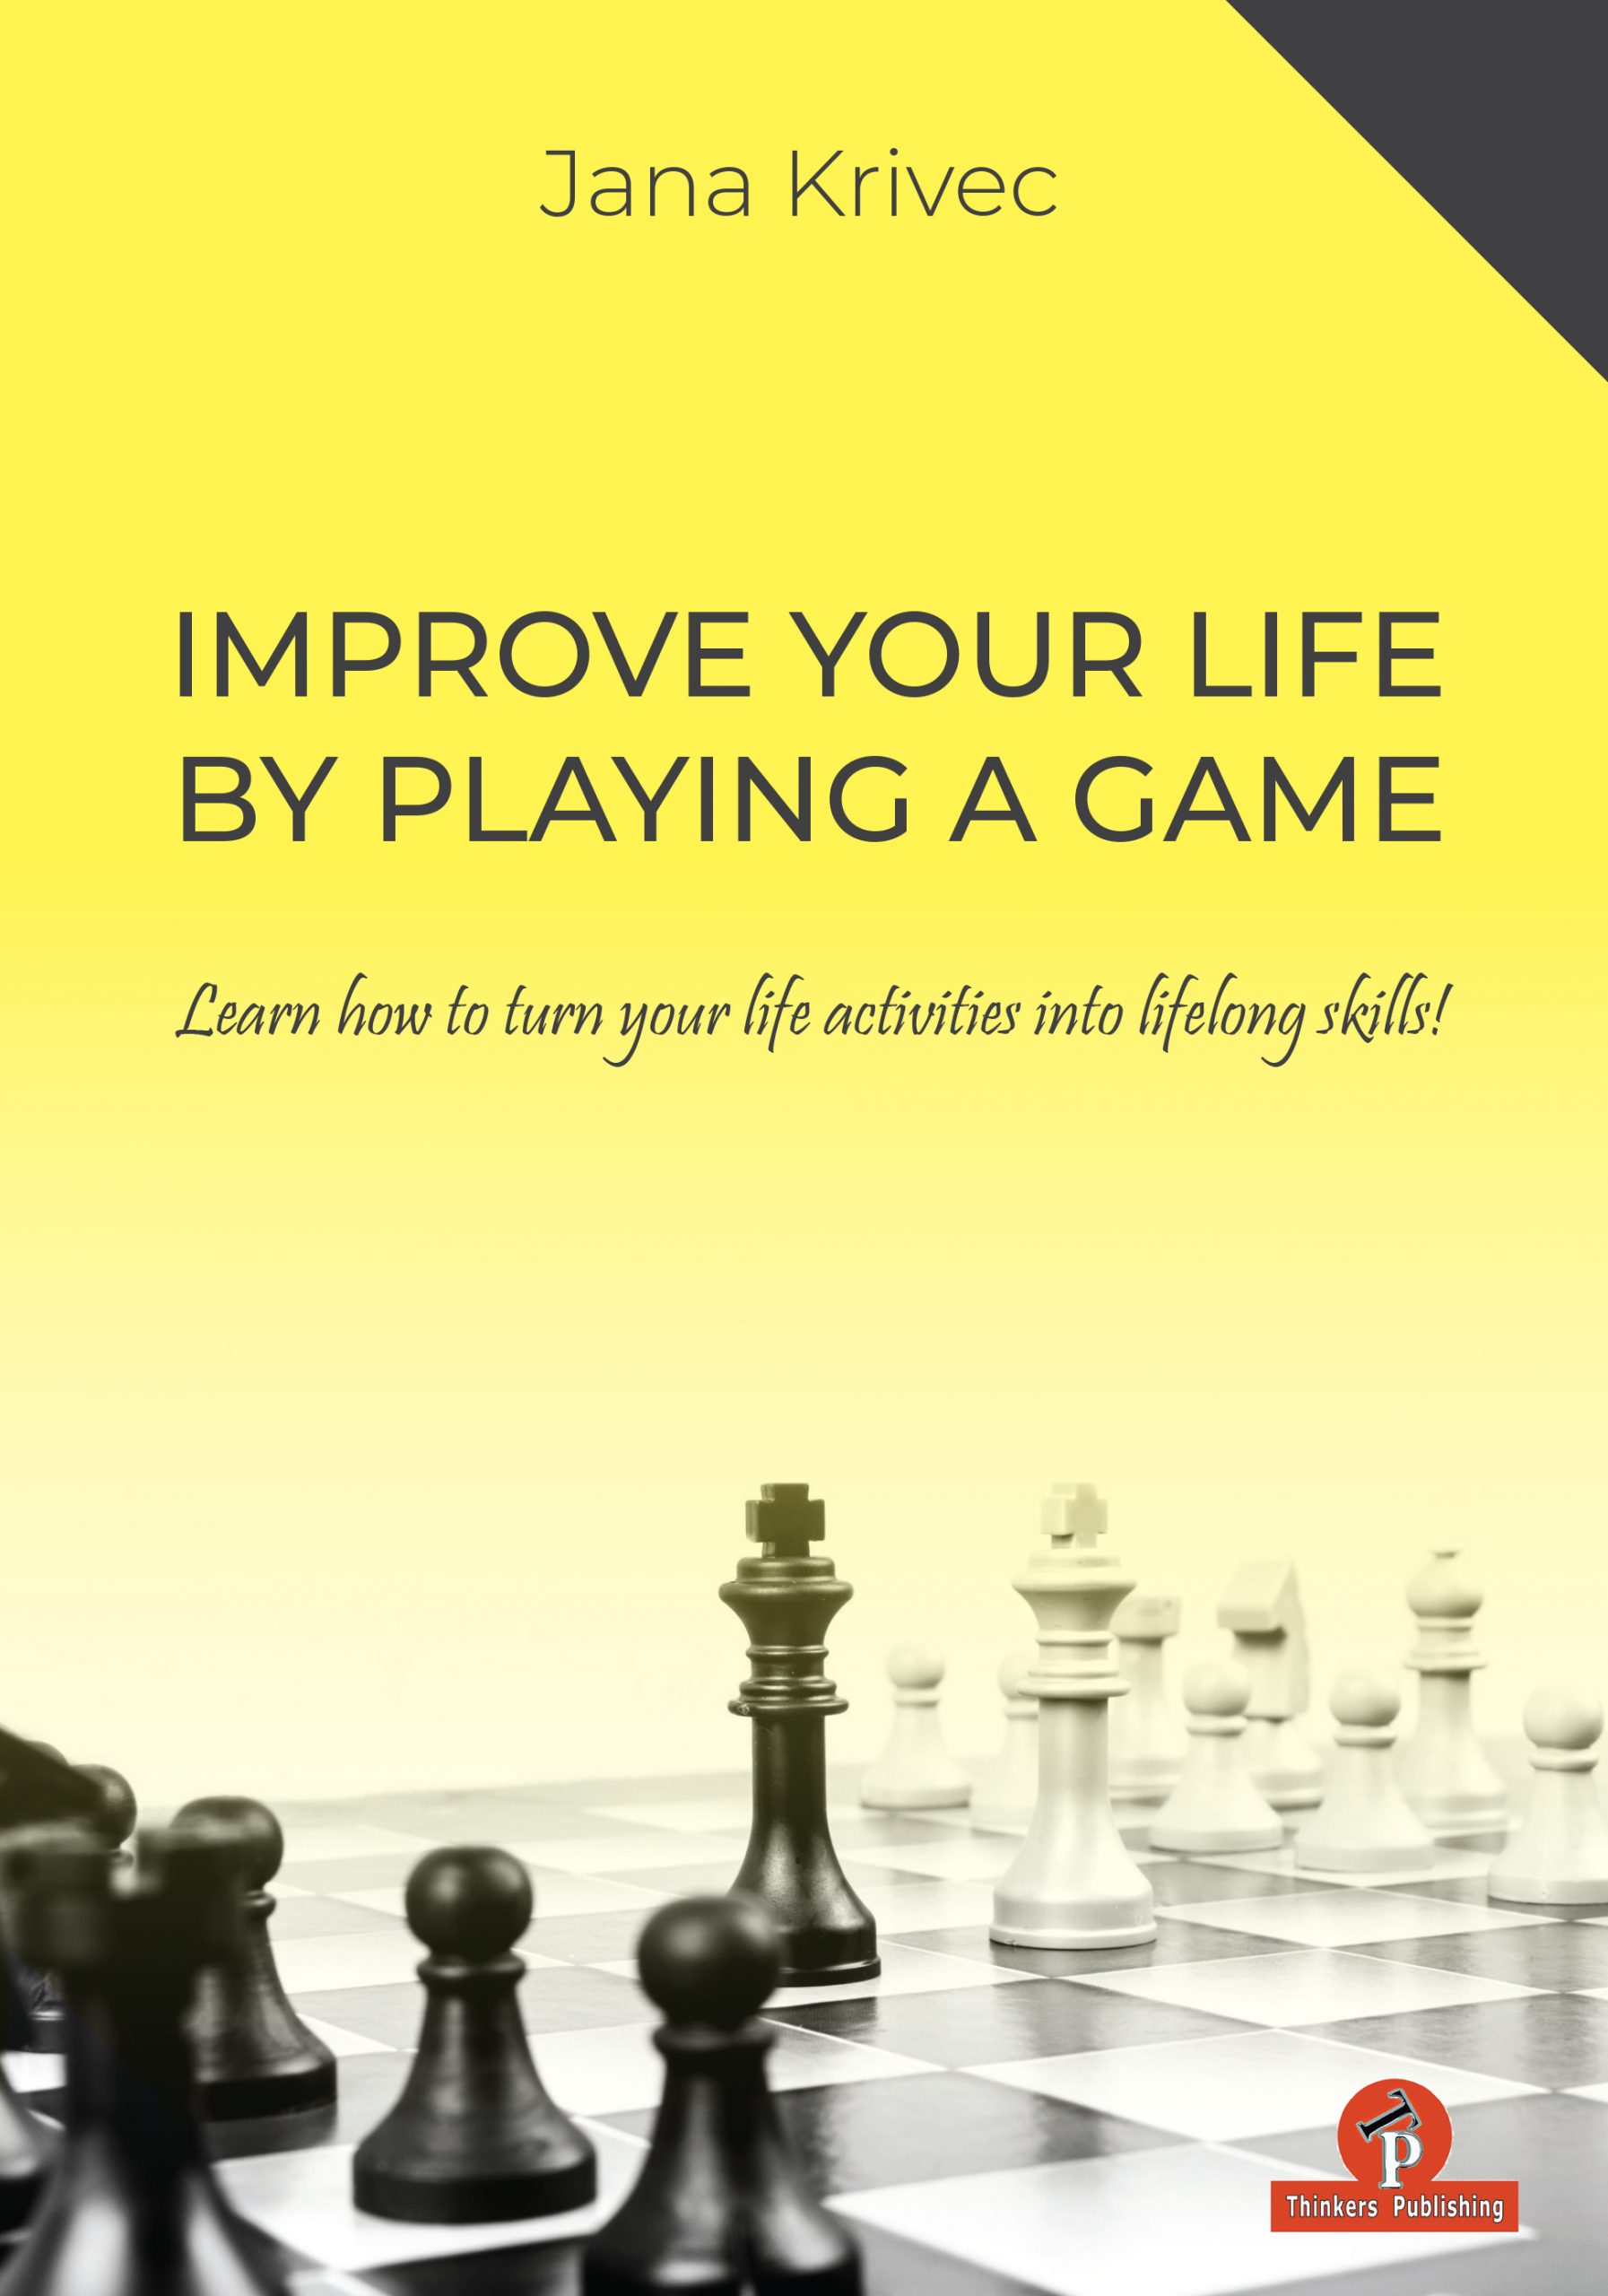 Improve Your Life by Playing a Game – Learn how to turn your life activities into lifelong skills, Jana Krivec